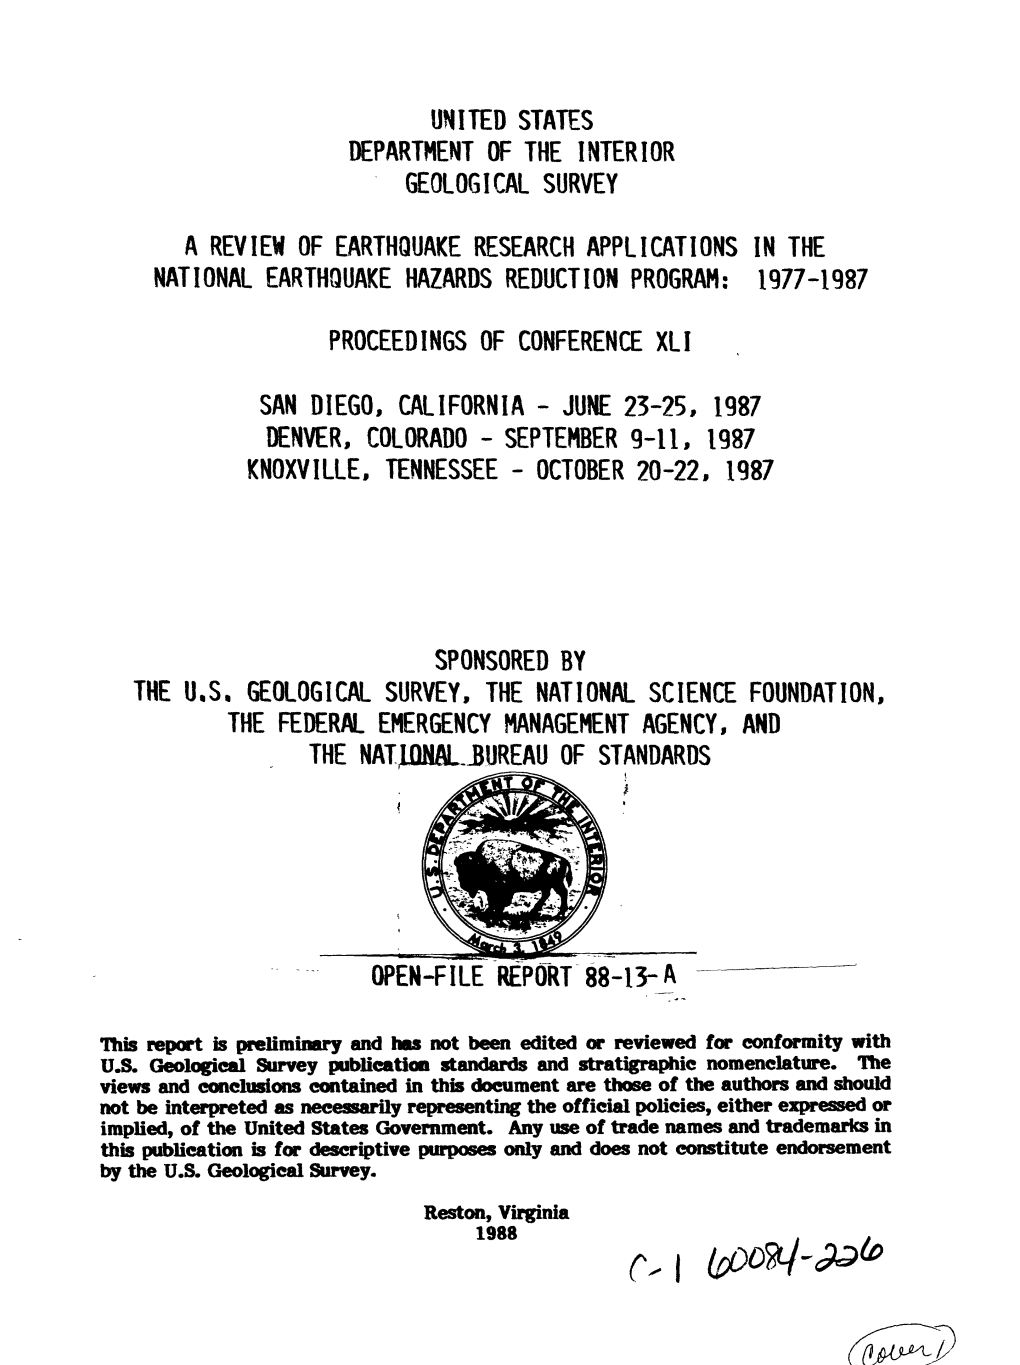 United States Department of the Interior Geological Survey a Review of Earthquake Research Applications in the National Earthqua